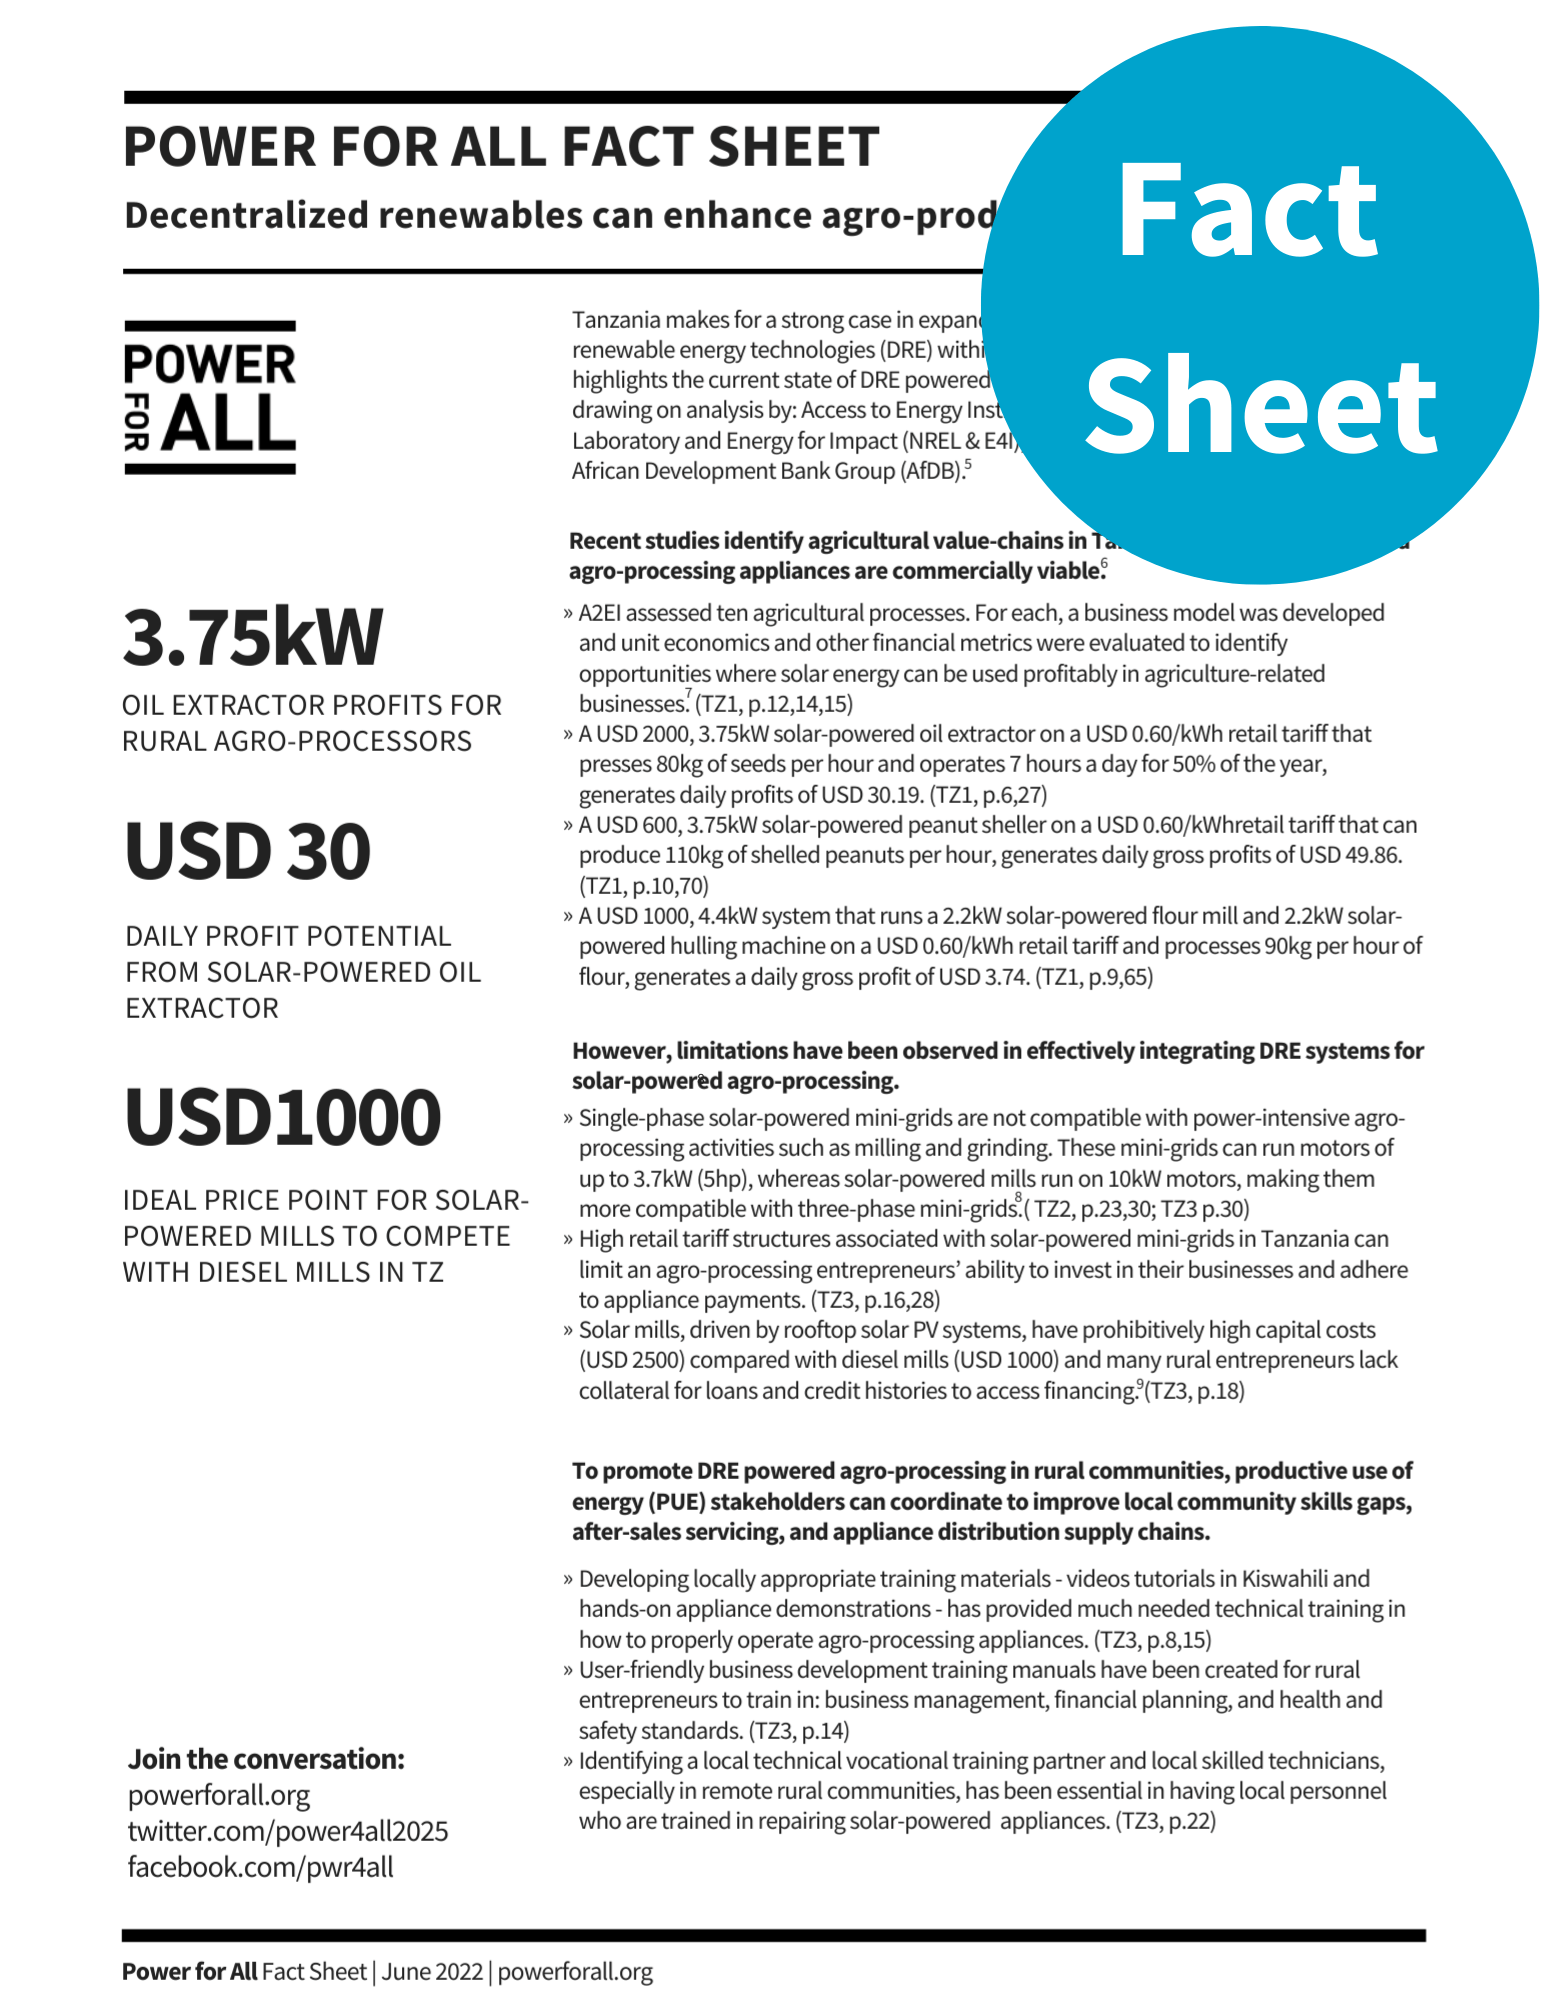 Factsheet: Decentralized Renewables Can Enhance Agro-Productivity In Tanzania.png